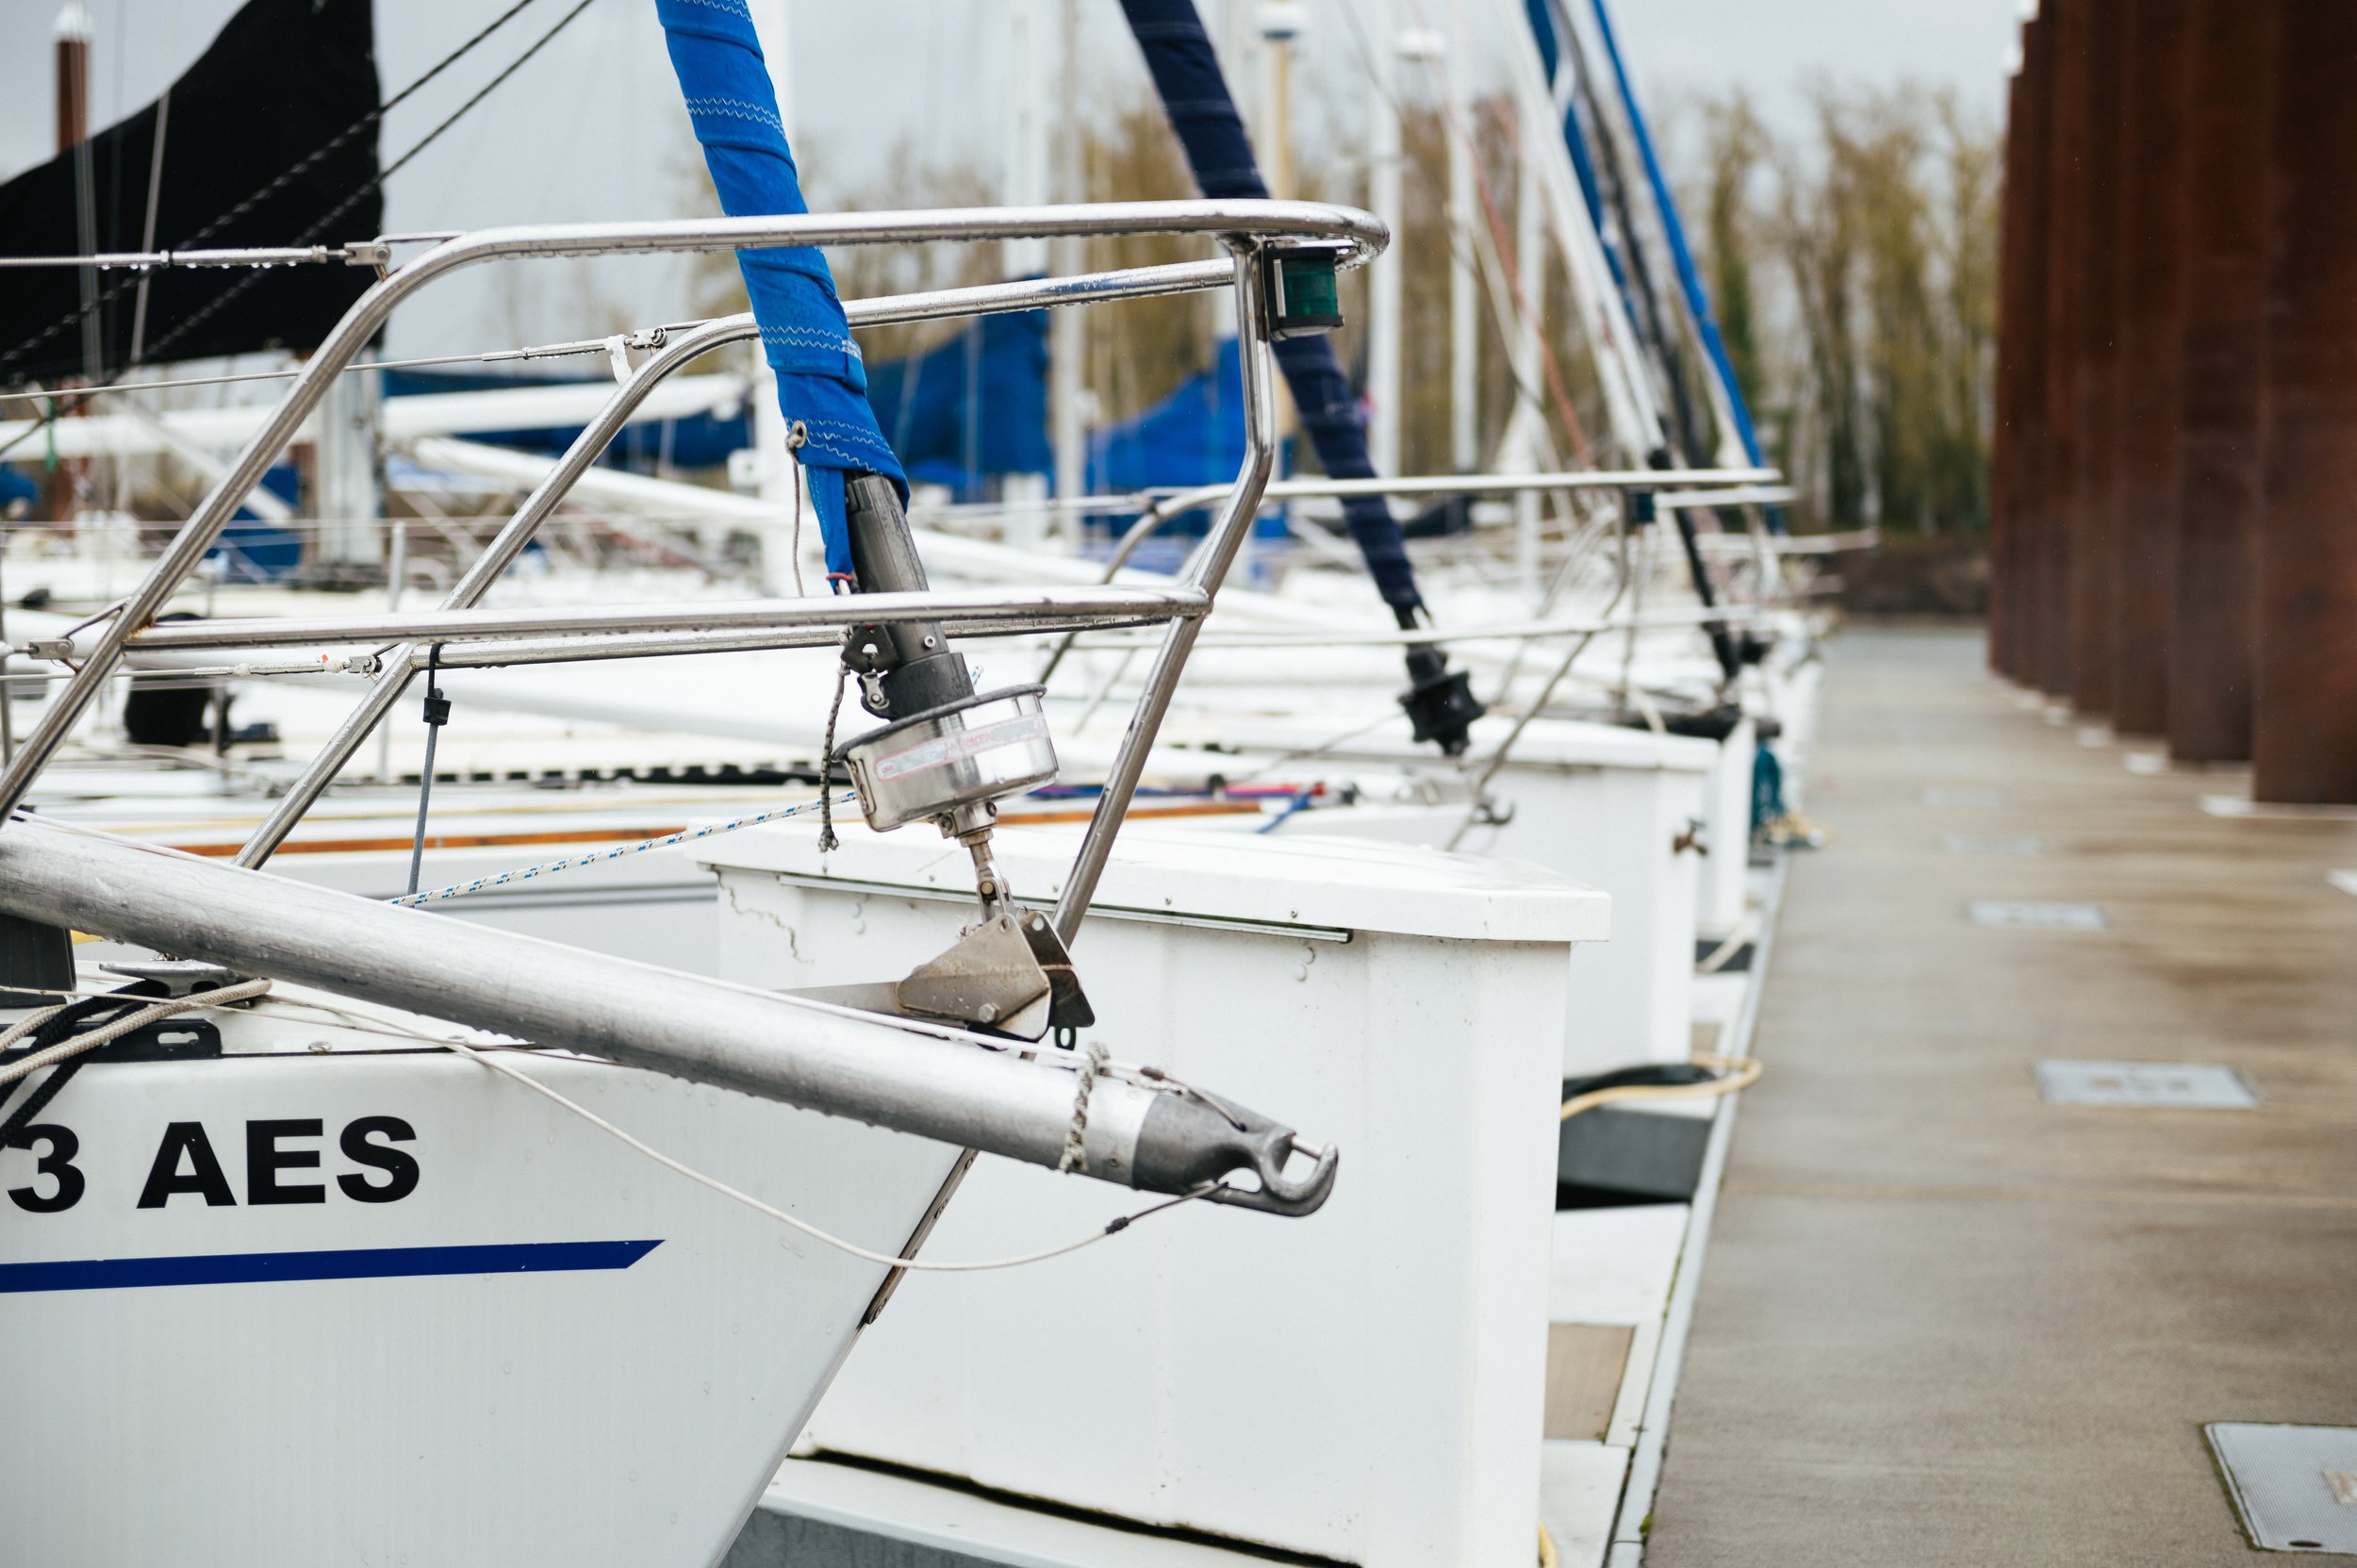 A group of sailboats docked at a marina captured in GEOFF HELZER's commercial brand photography